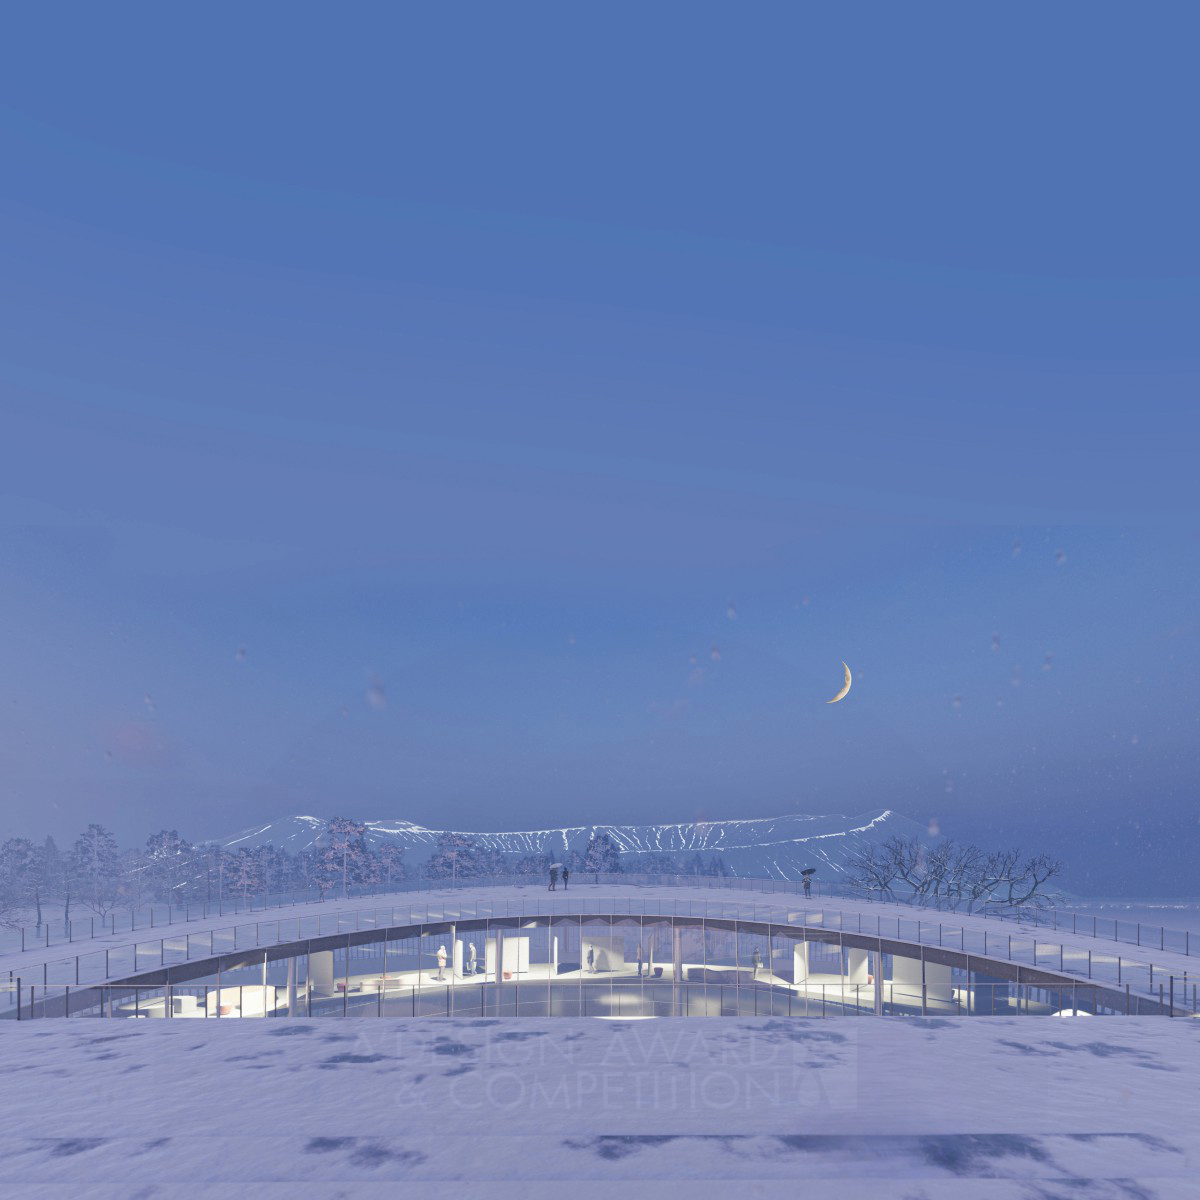 Iceland Volcano Museum: Architectural Marvel by Yuting Zhang